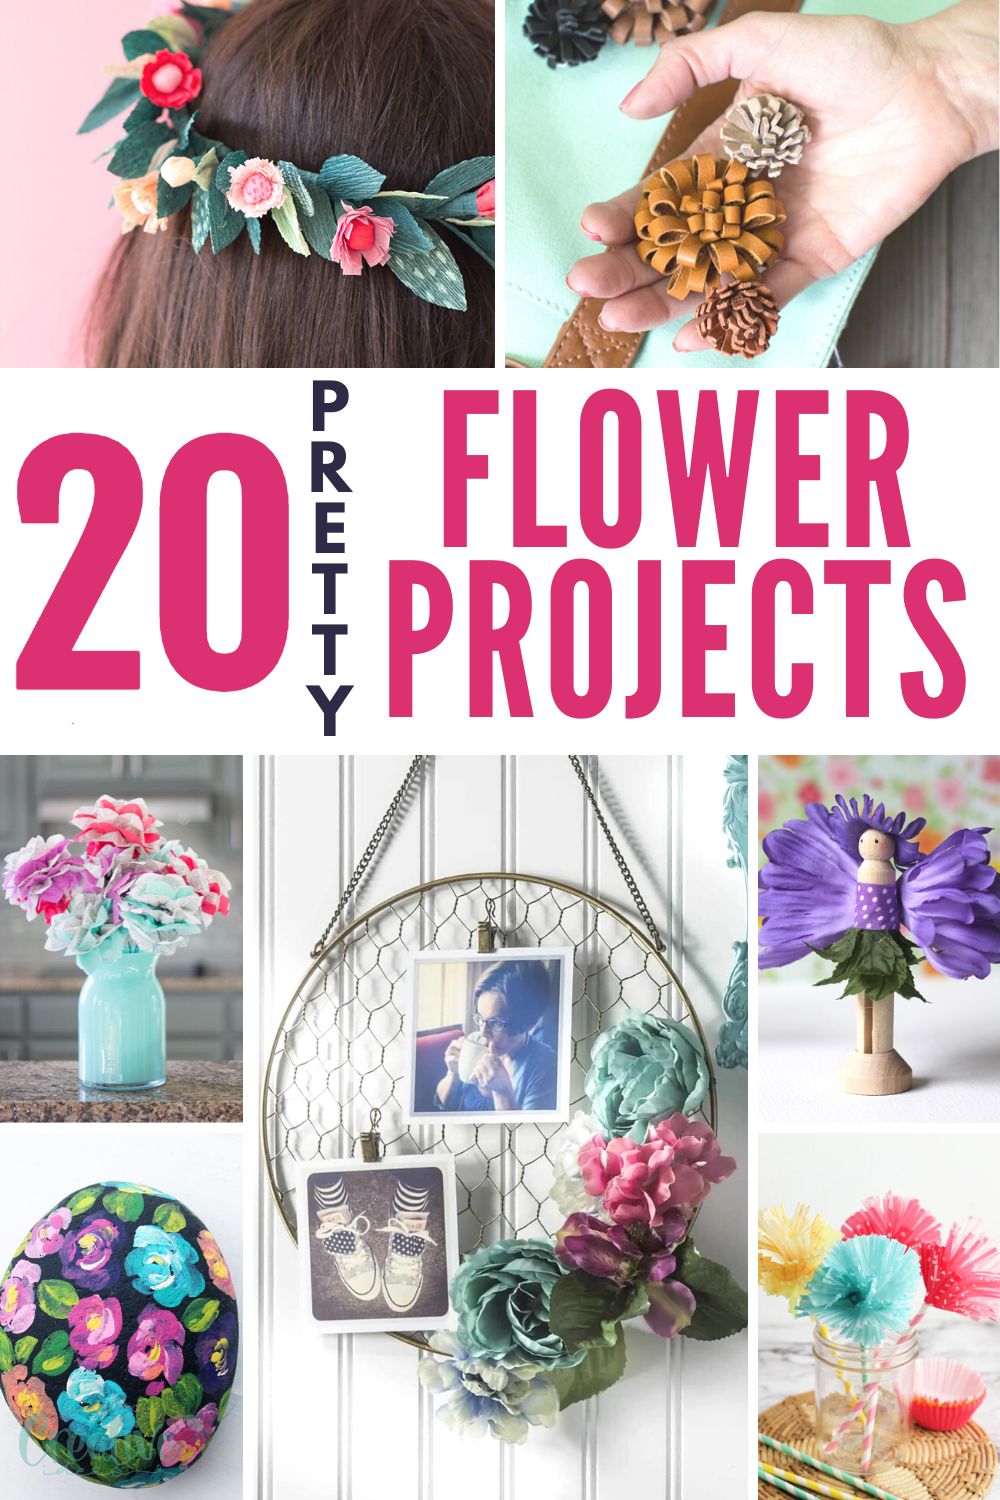 20 Pretty FLOWER CRAFTS to make today - Easy Peasy Creative Ideas